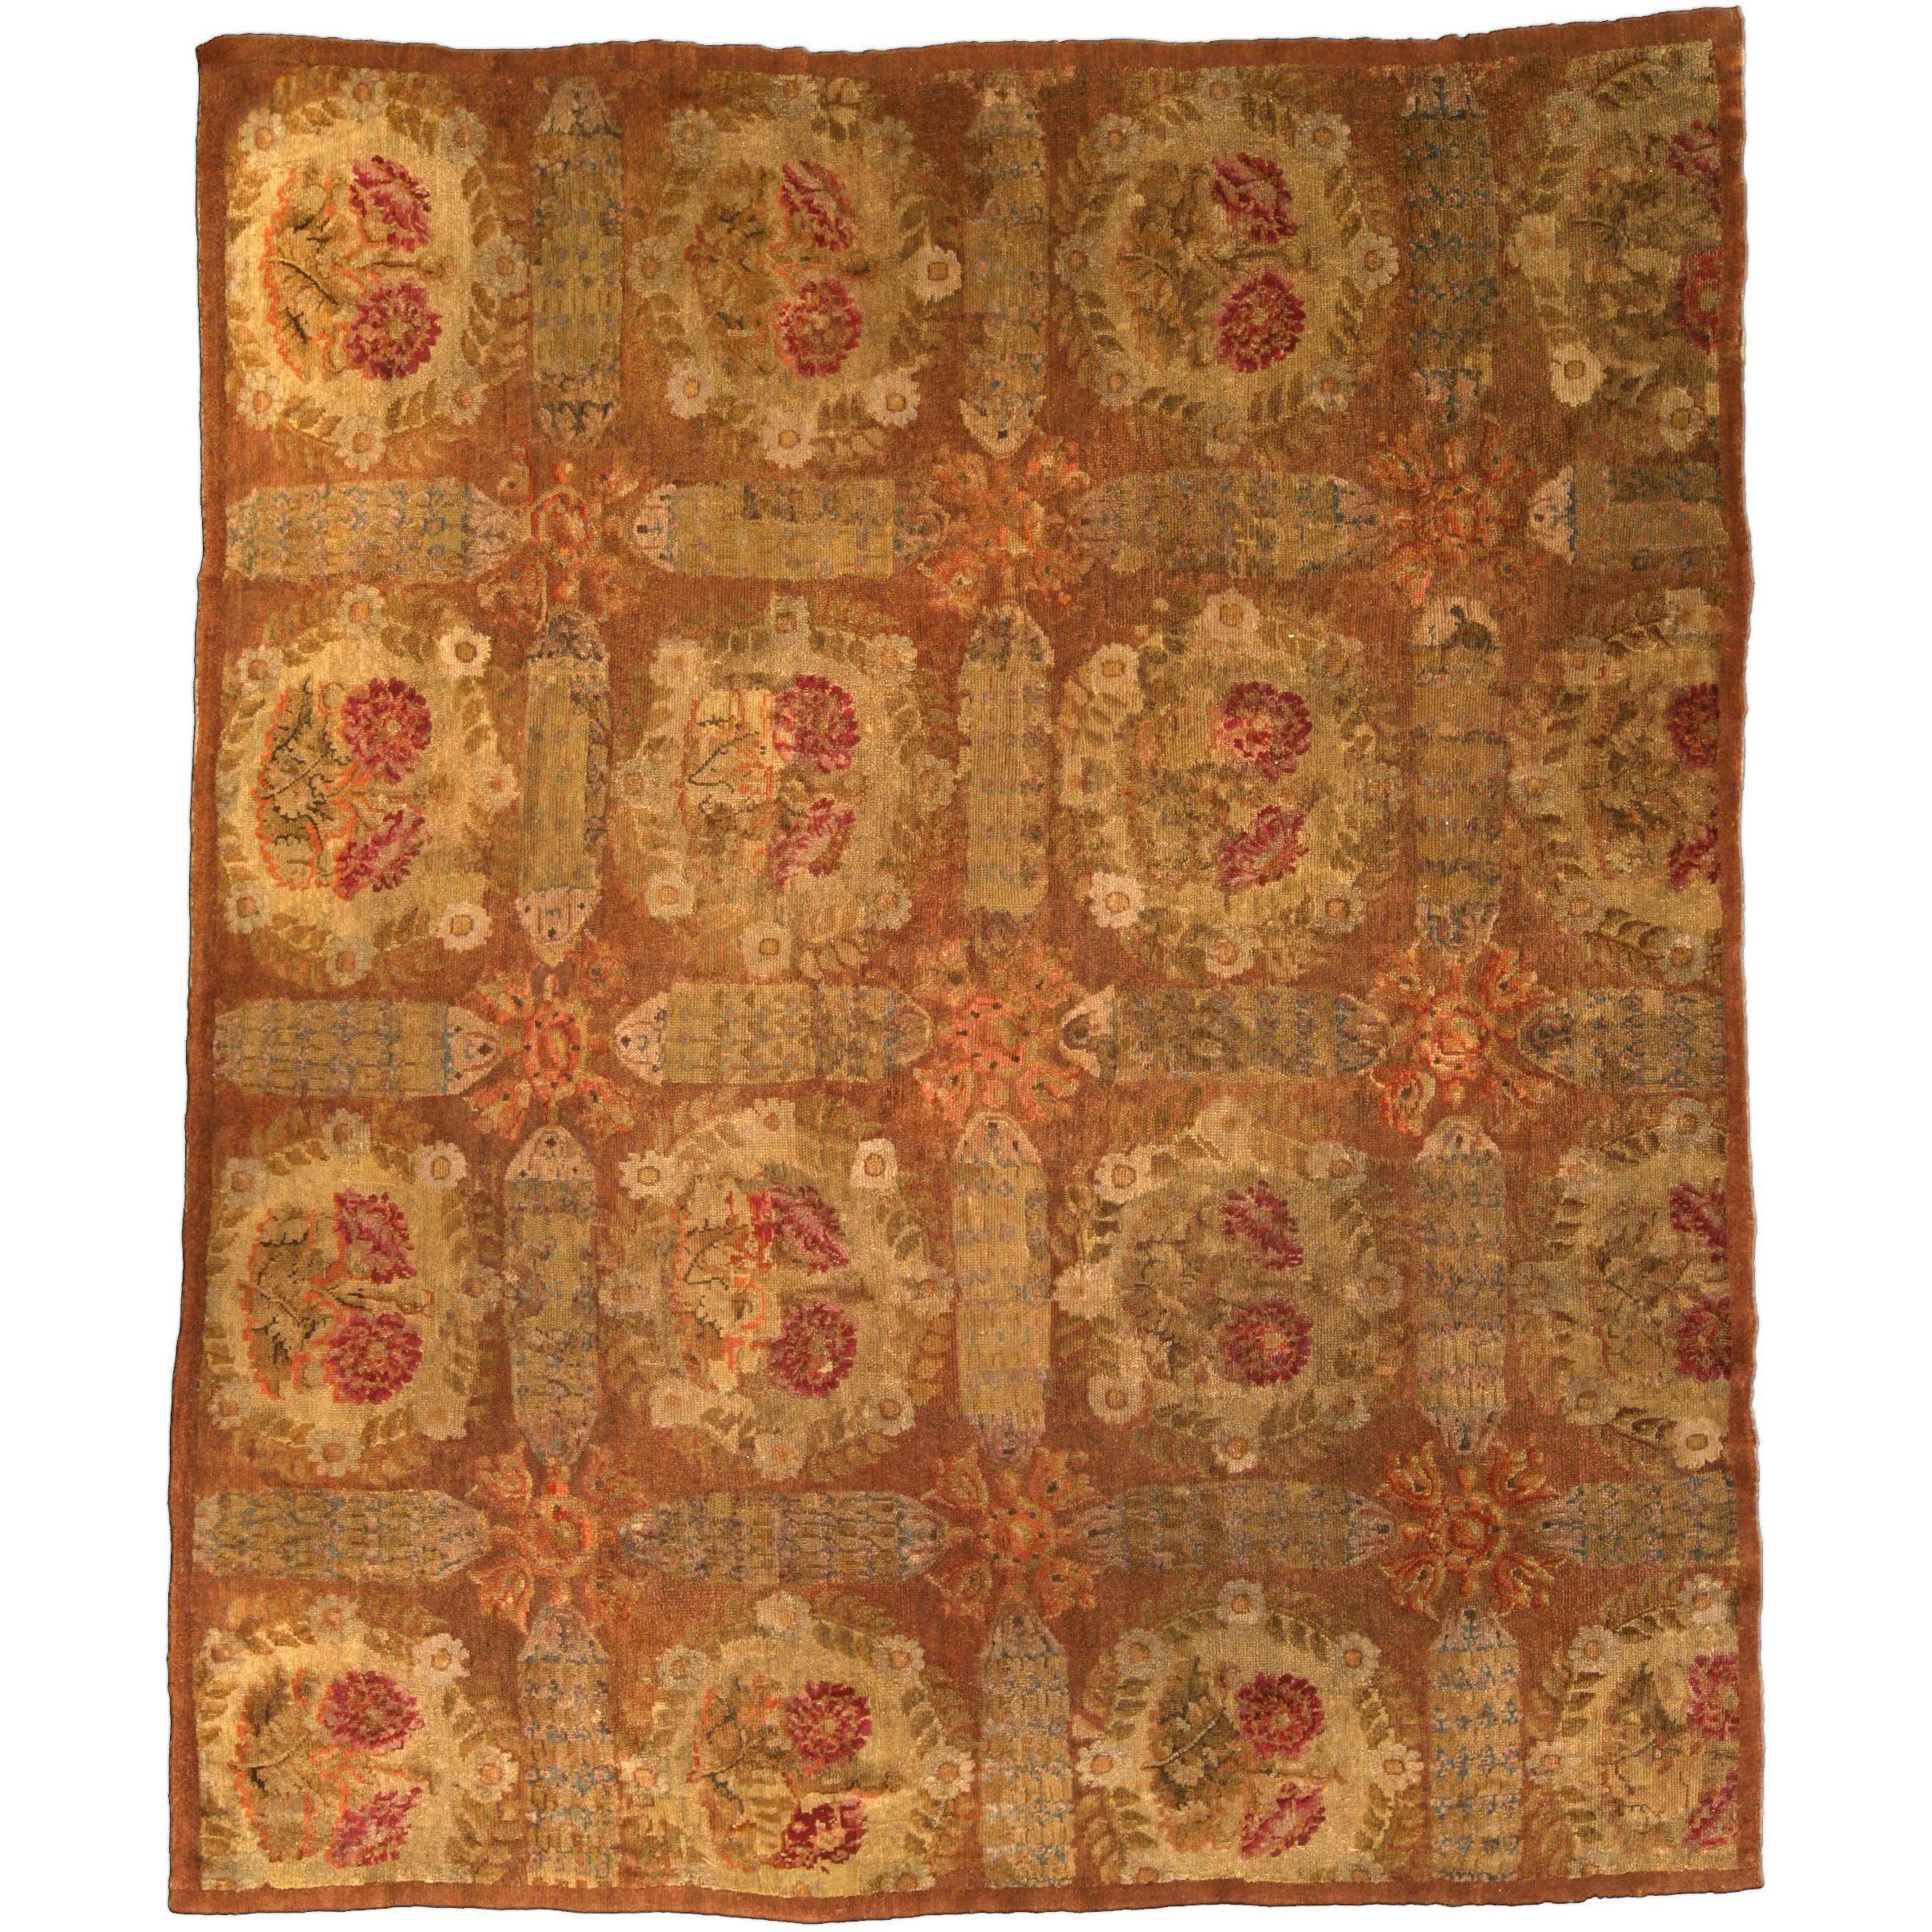 1800s French Savonnerie Floral Handmade Wool Rug For Sale